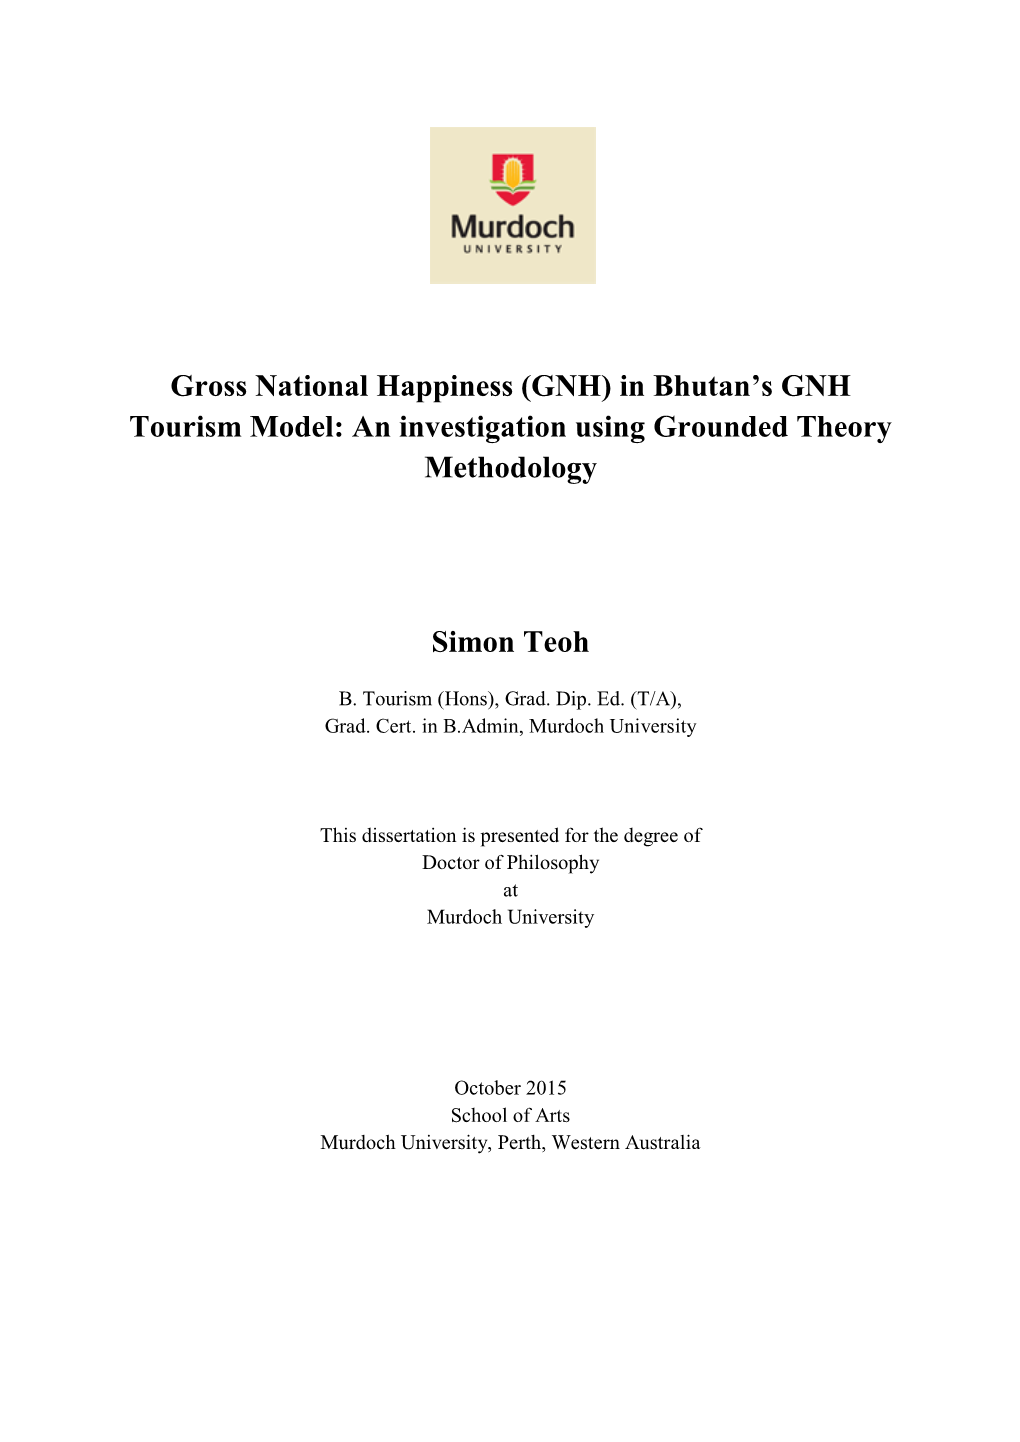 Gross National Happiness (GNH) in Bhutan’S GNH Tourism Model: an Investigation Using Grounded Theory Methodology